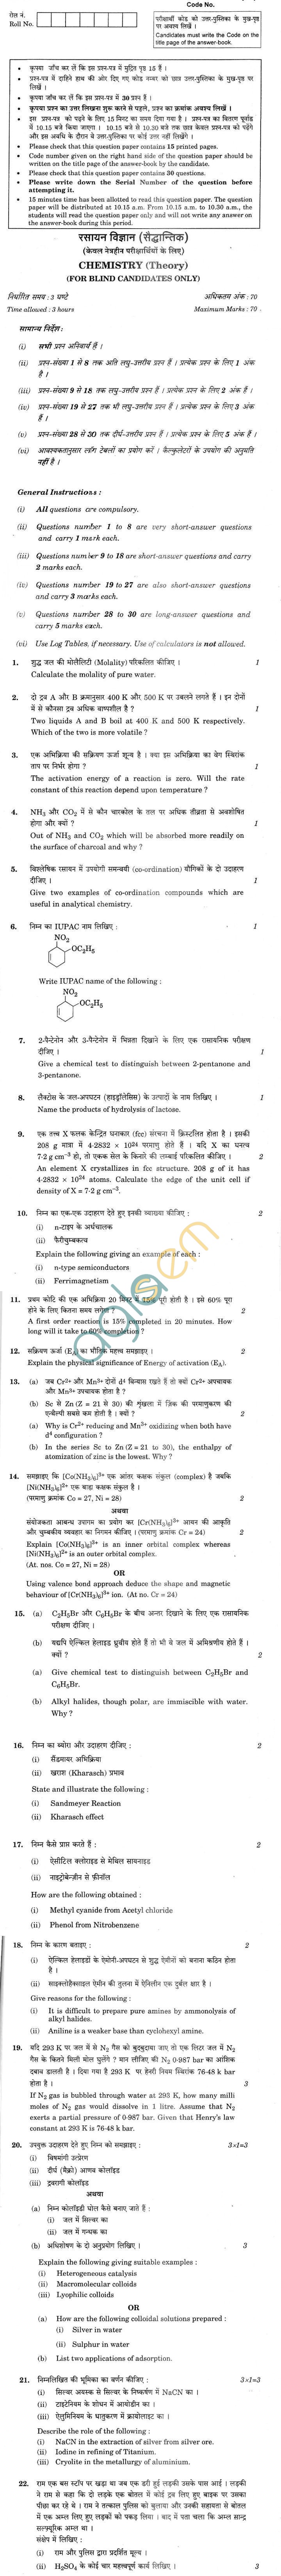 CBSE Compartment Exam 2013 Class XII Question Paper - Chemistry for Blind Candidate